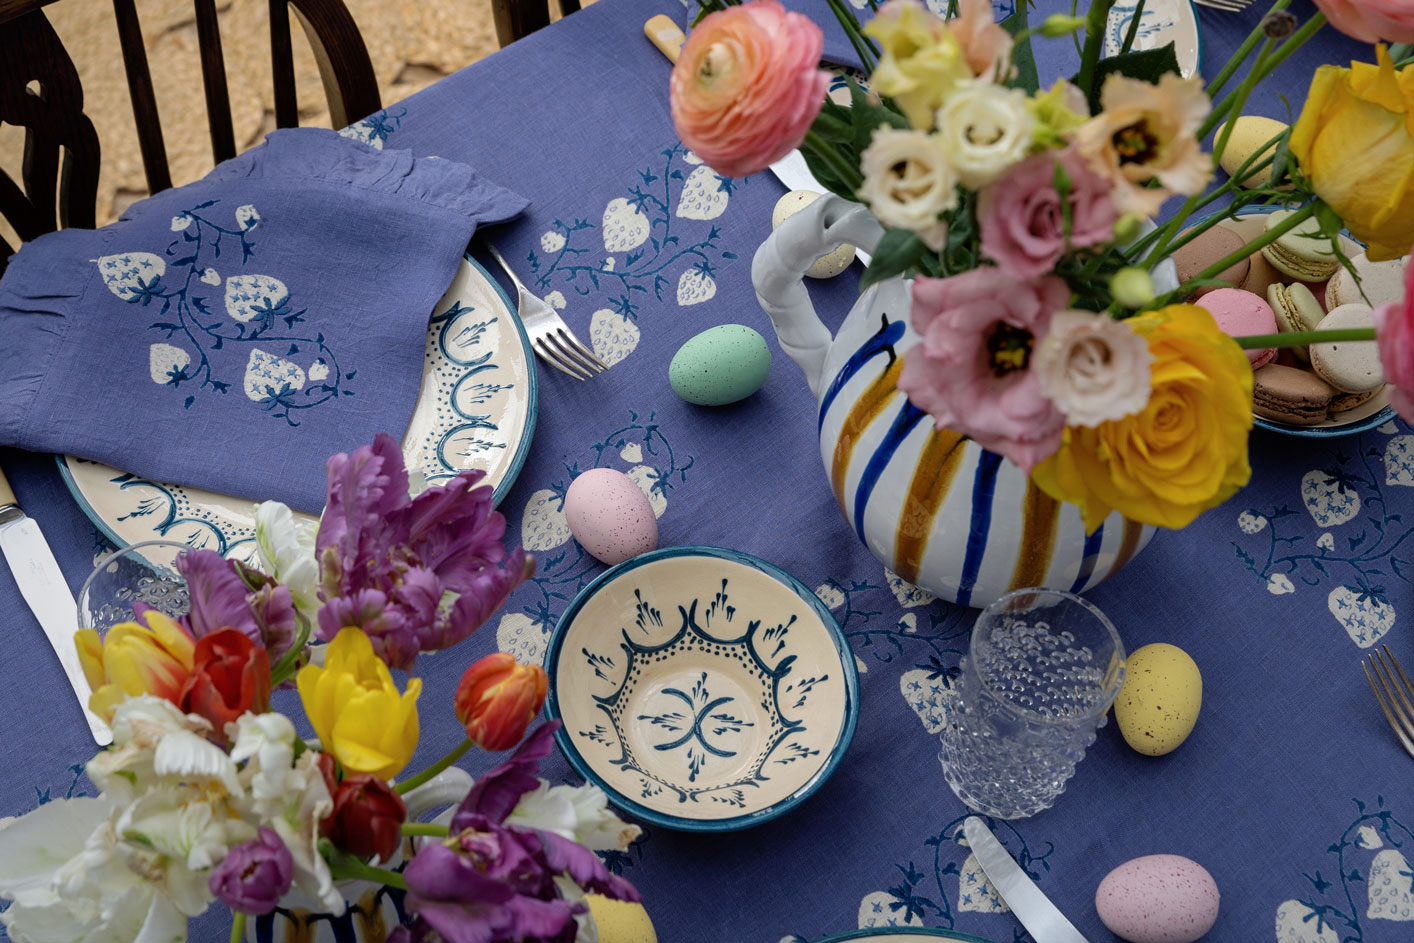 My Easter tablescape